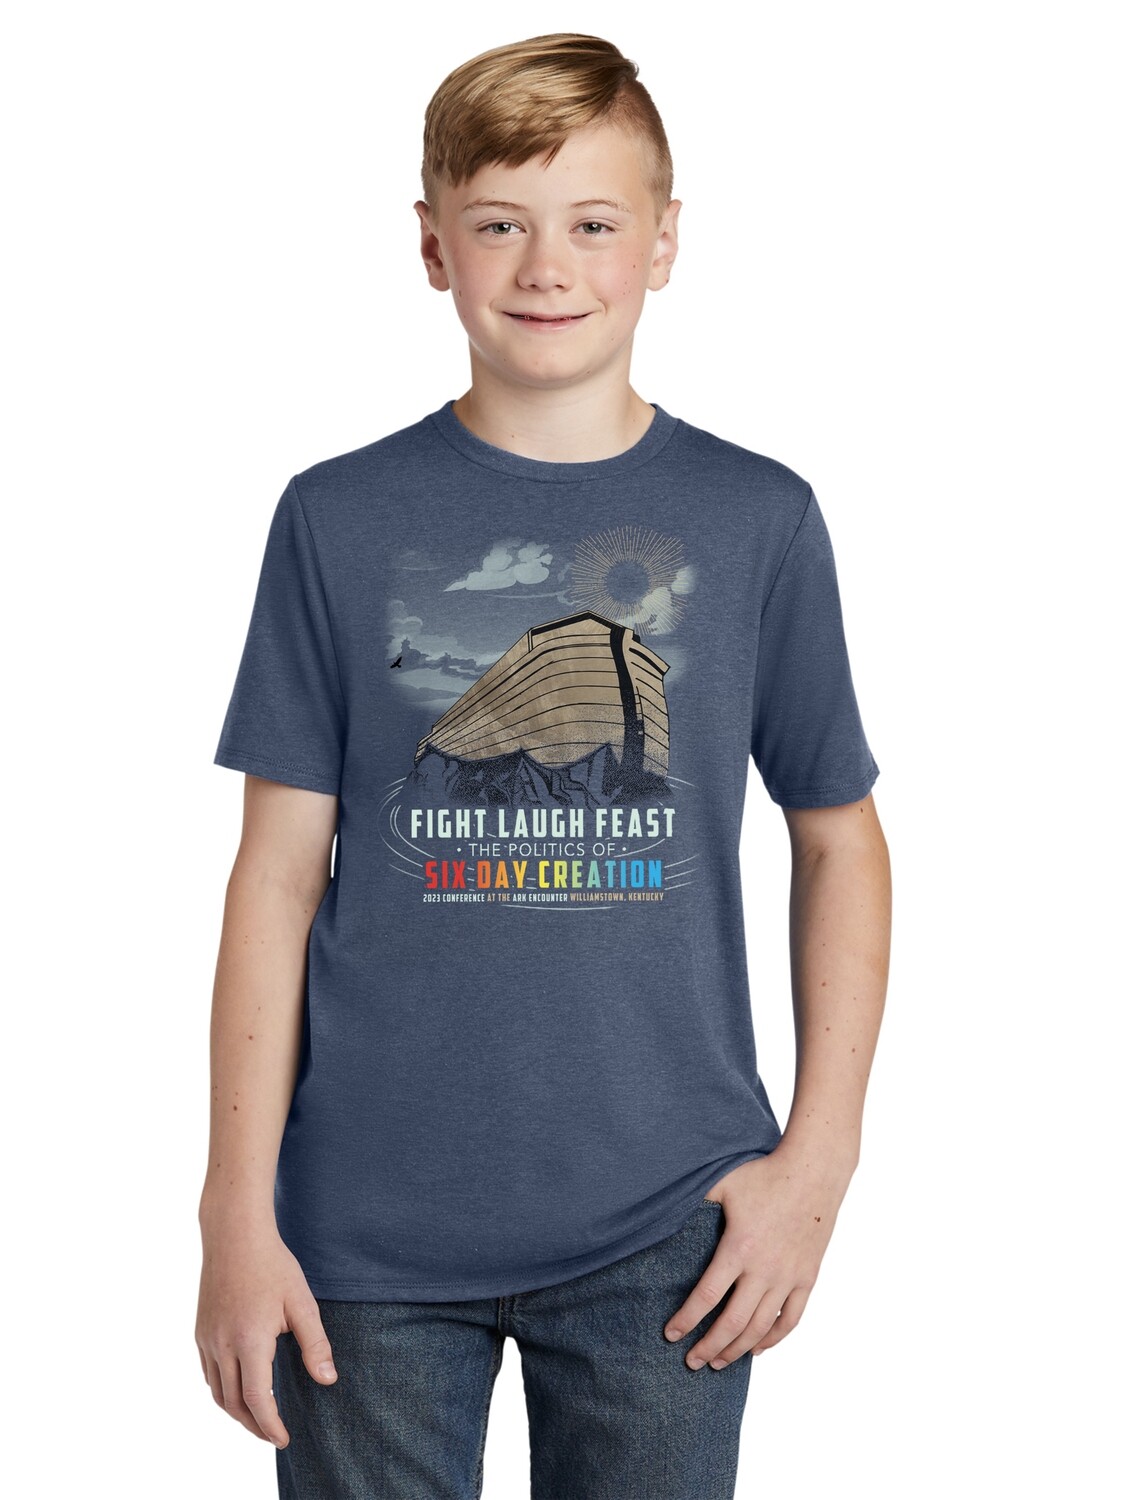 2023 FLF Conference Tri-Blend (Youth), Style: Youth Short Sleeve